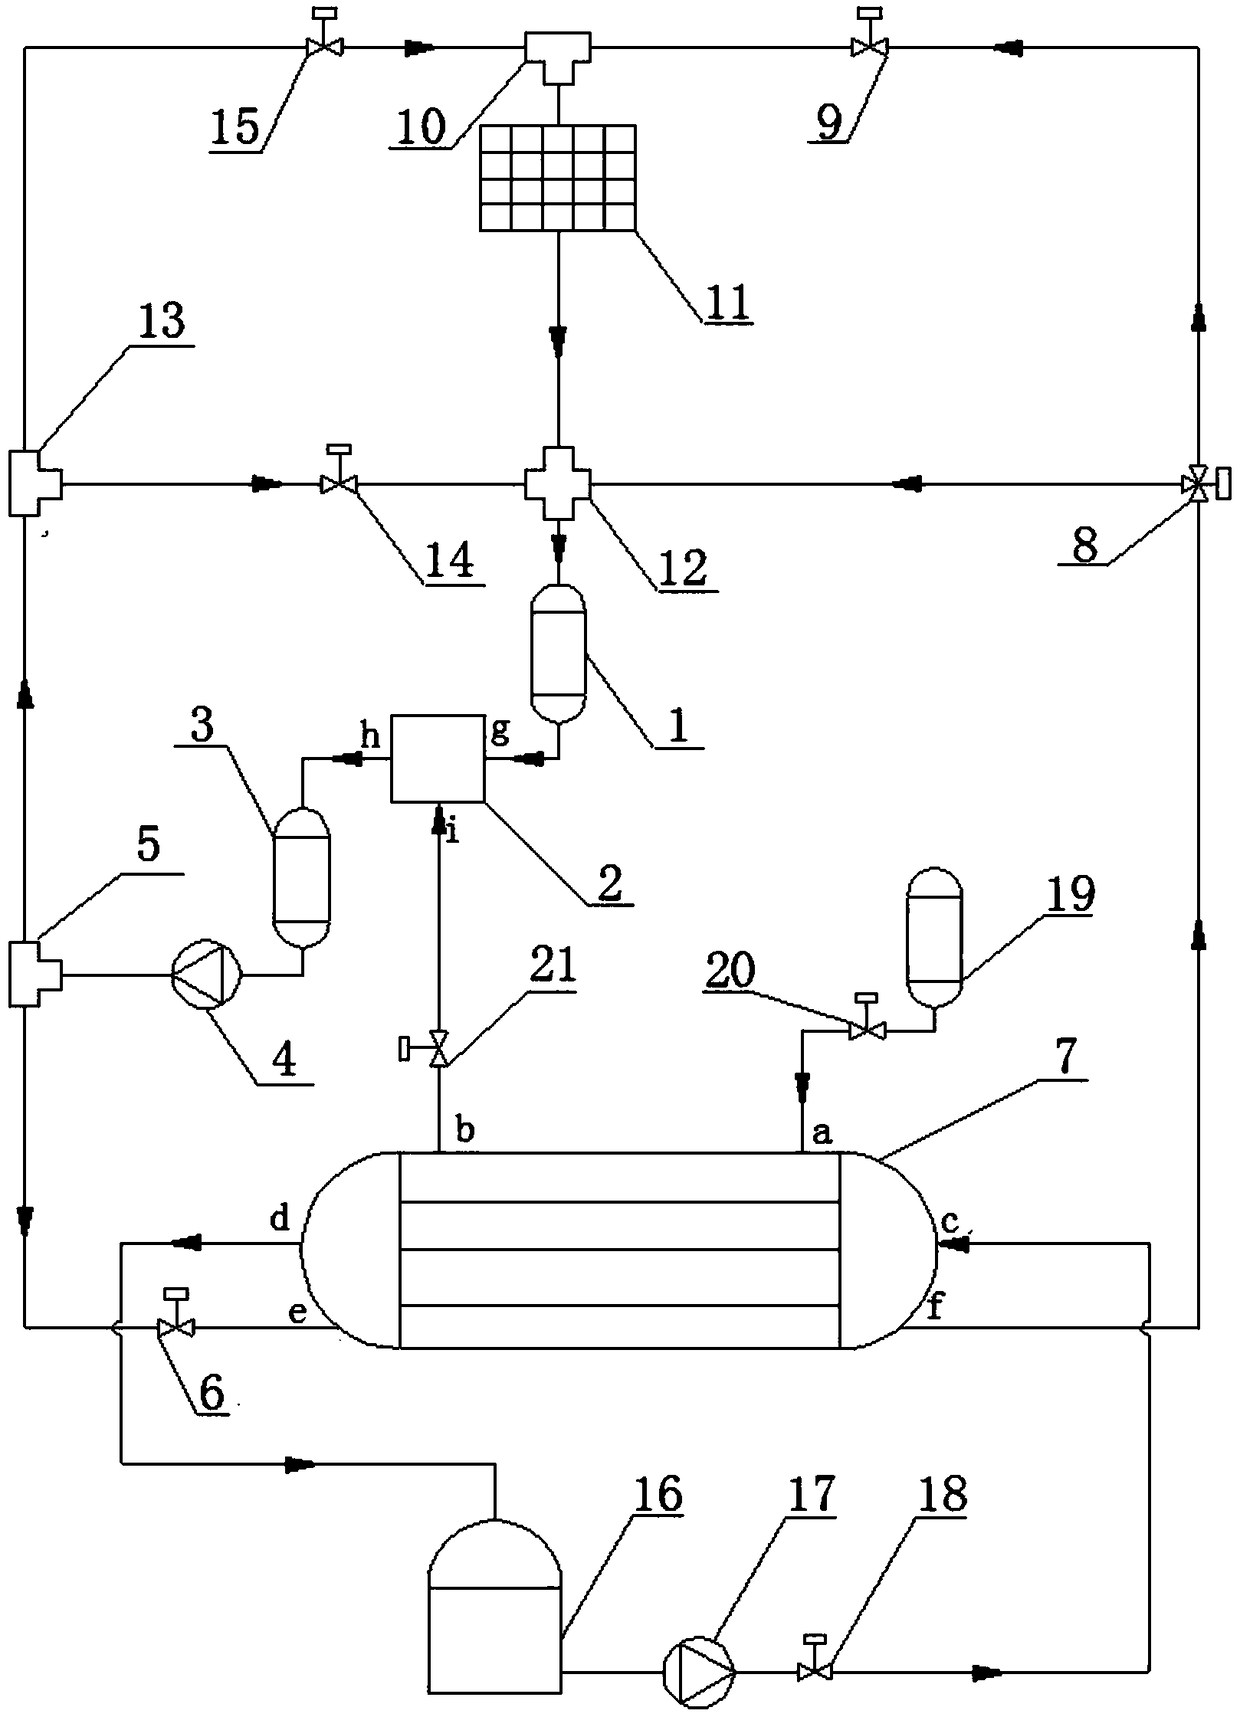 A marine LNG vaporization and air conditioning integrated system and control method